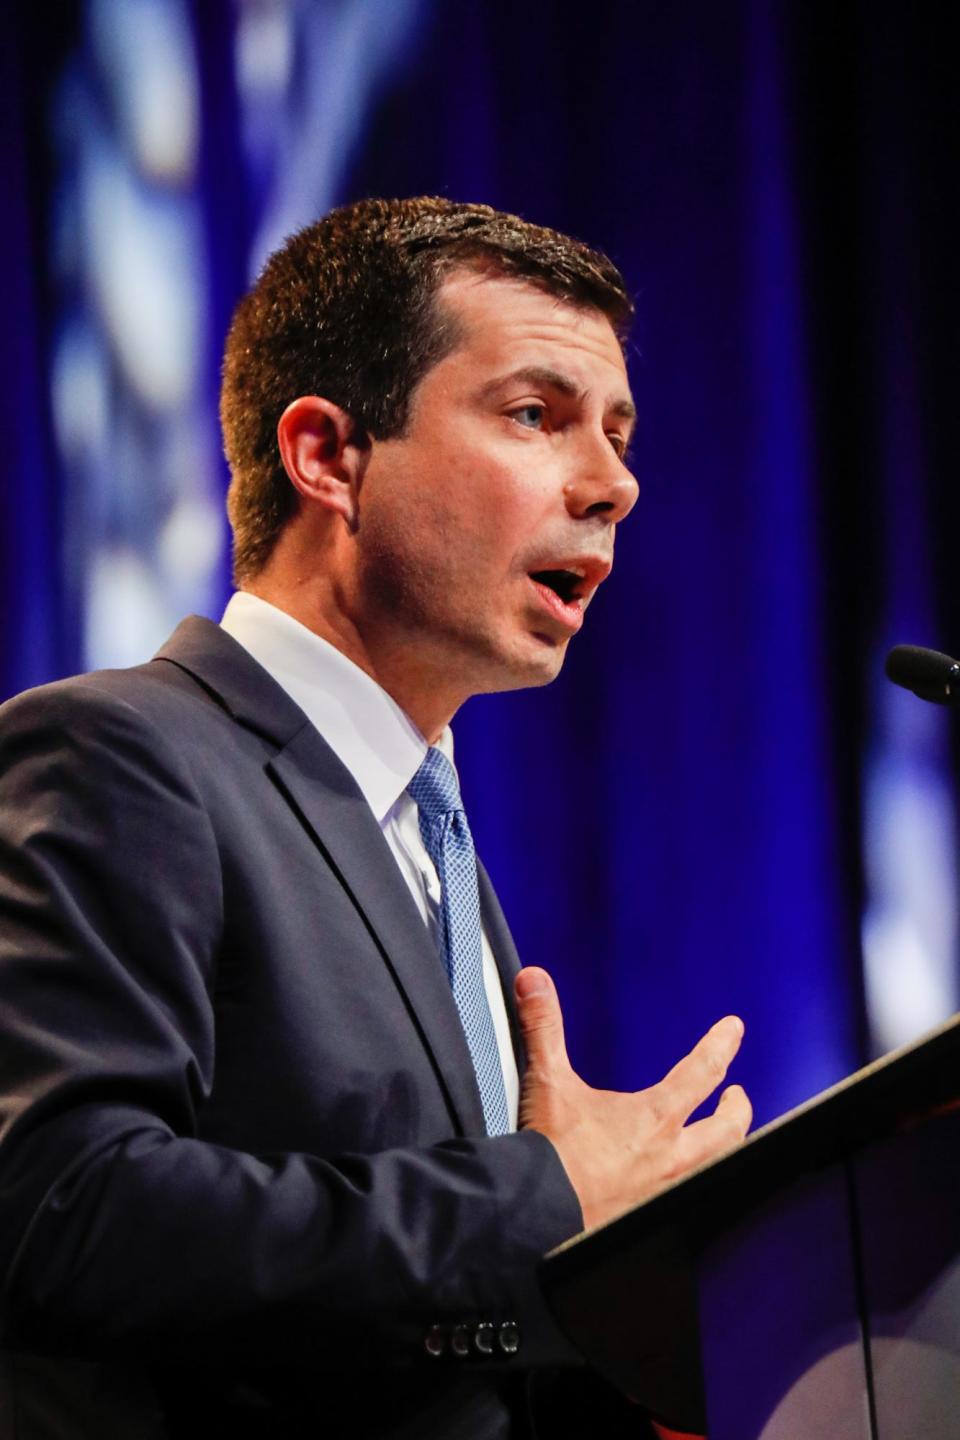 Presidential candidate and Mayor of South Bend Ind., Pete Buttigieg, speaks during the National Urban League Conference in Indianapolis on Friday, July 26, 2019.